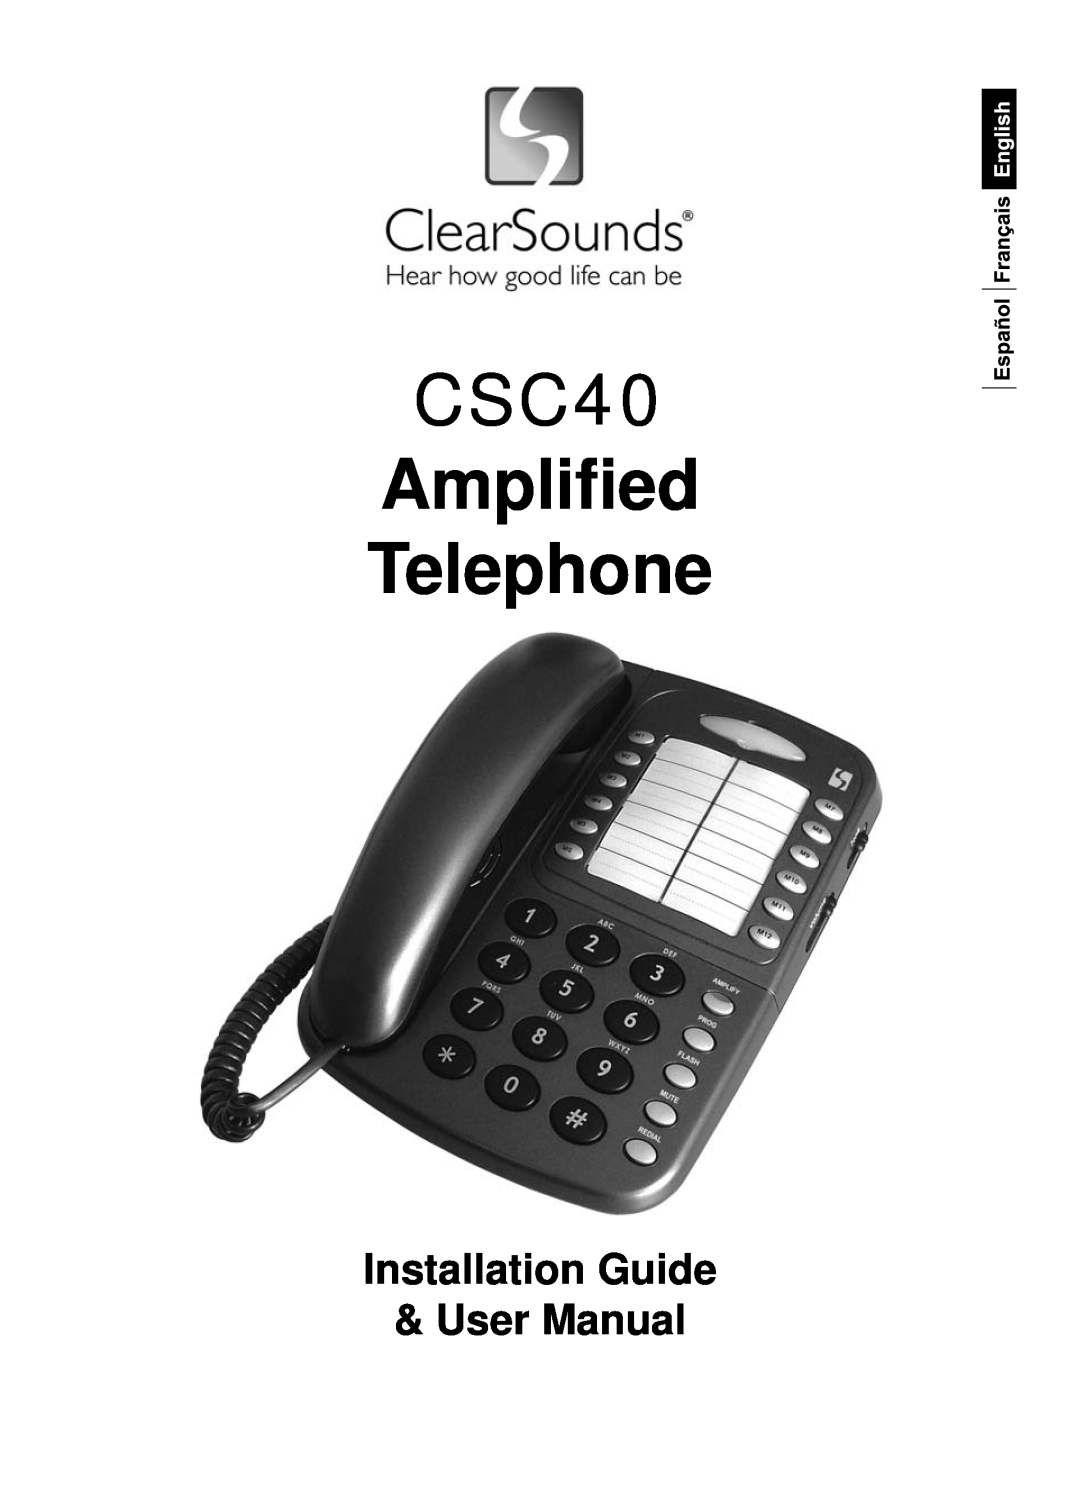 ClearSounds user manual CSC40 Ampliﬁed Telephone, Installation Guide User Manual 